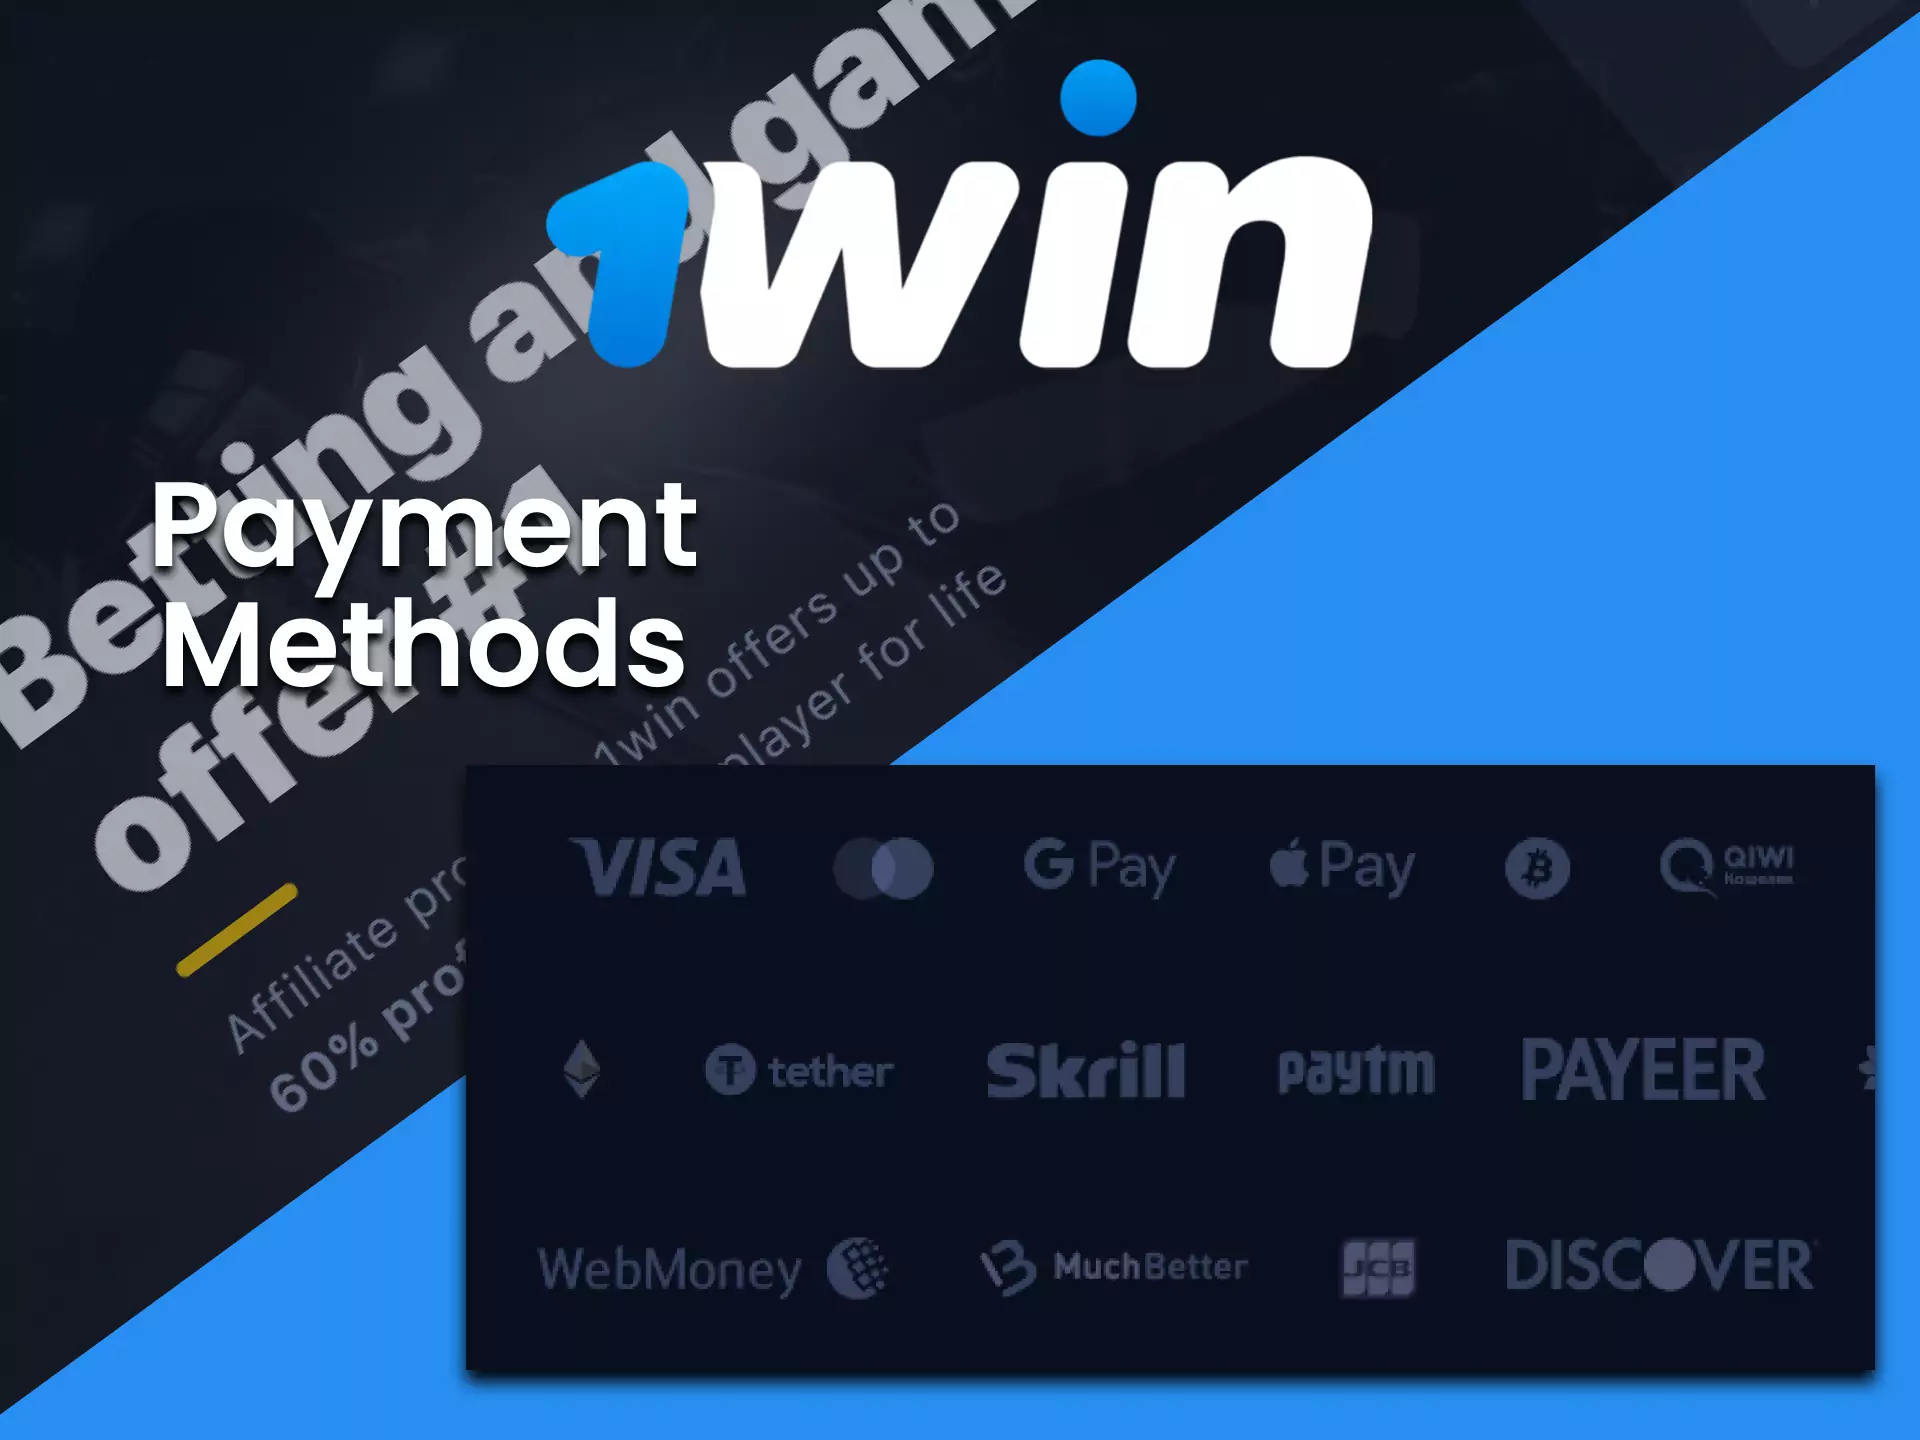 The 1win affiliate program uses the most common payment methods in India.